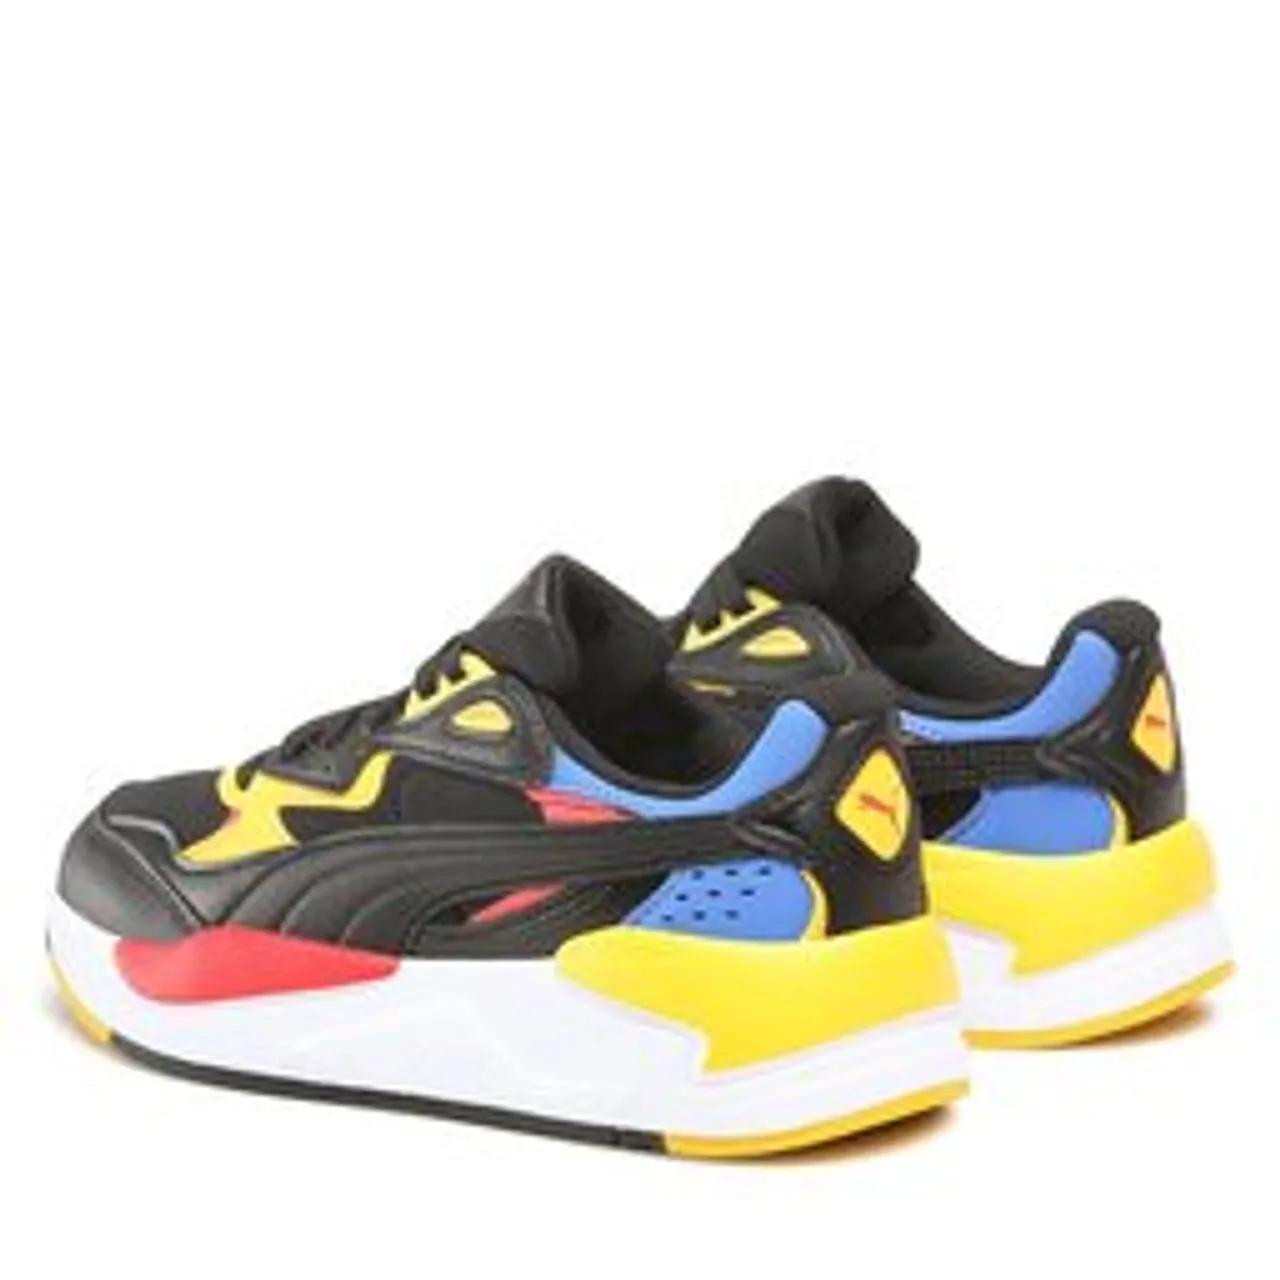 Sneakers Puma X-Ray Speed Jr 384898 04 Black/Yellow/Blue Red 04